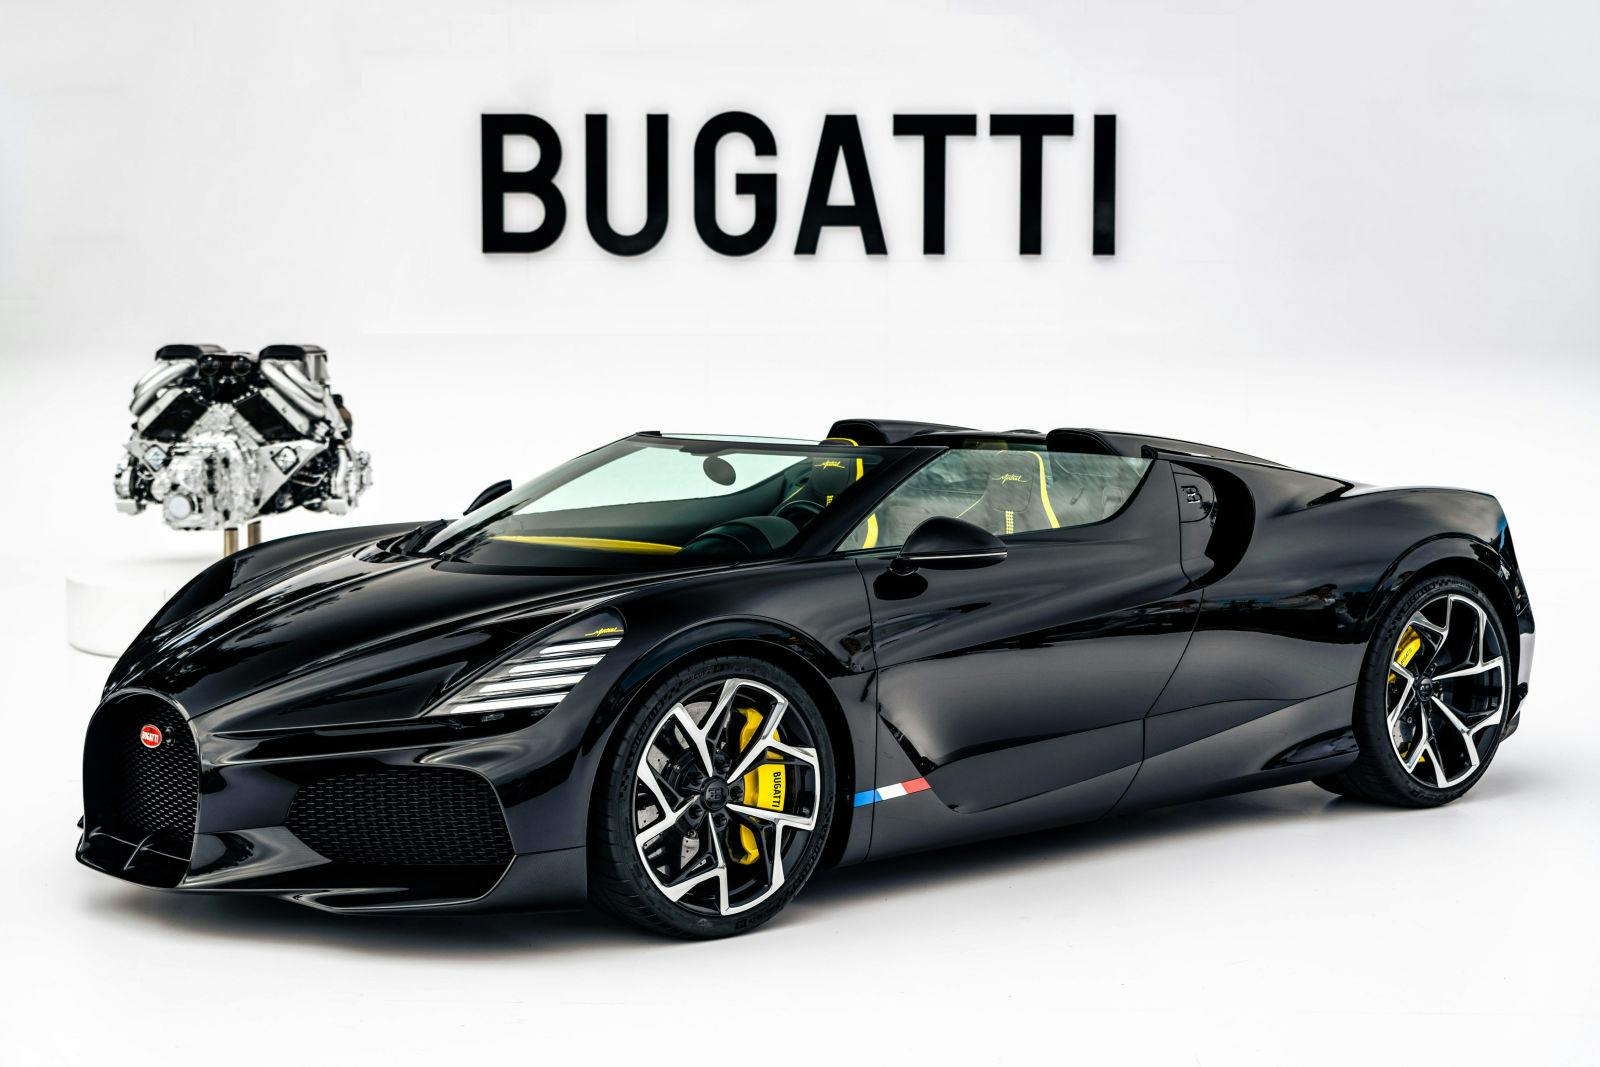 Bugatti unveiled its latest icon the W16 Mistral to the world at The Quail, A Motorsports Gathering during Monterey Car Week.